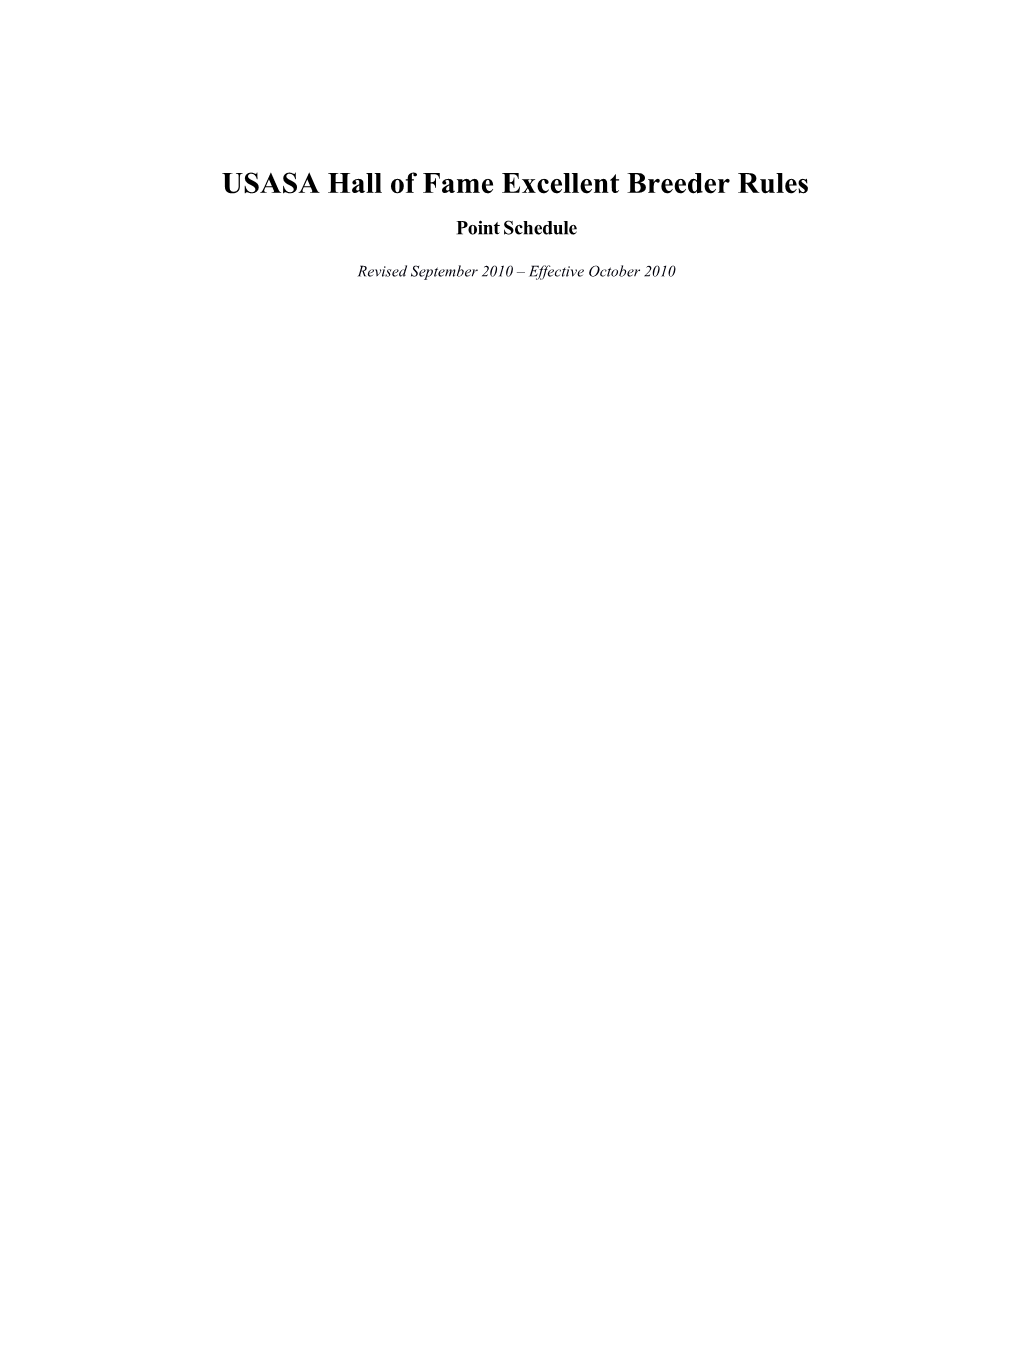 USASA Hall of Fame Excellent Breeder Rules